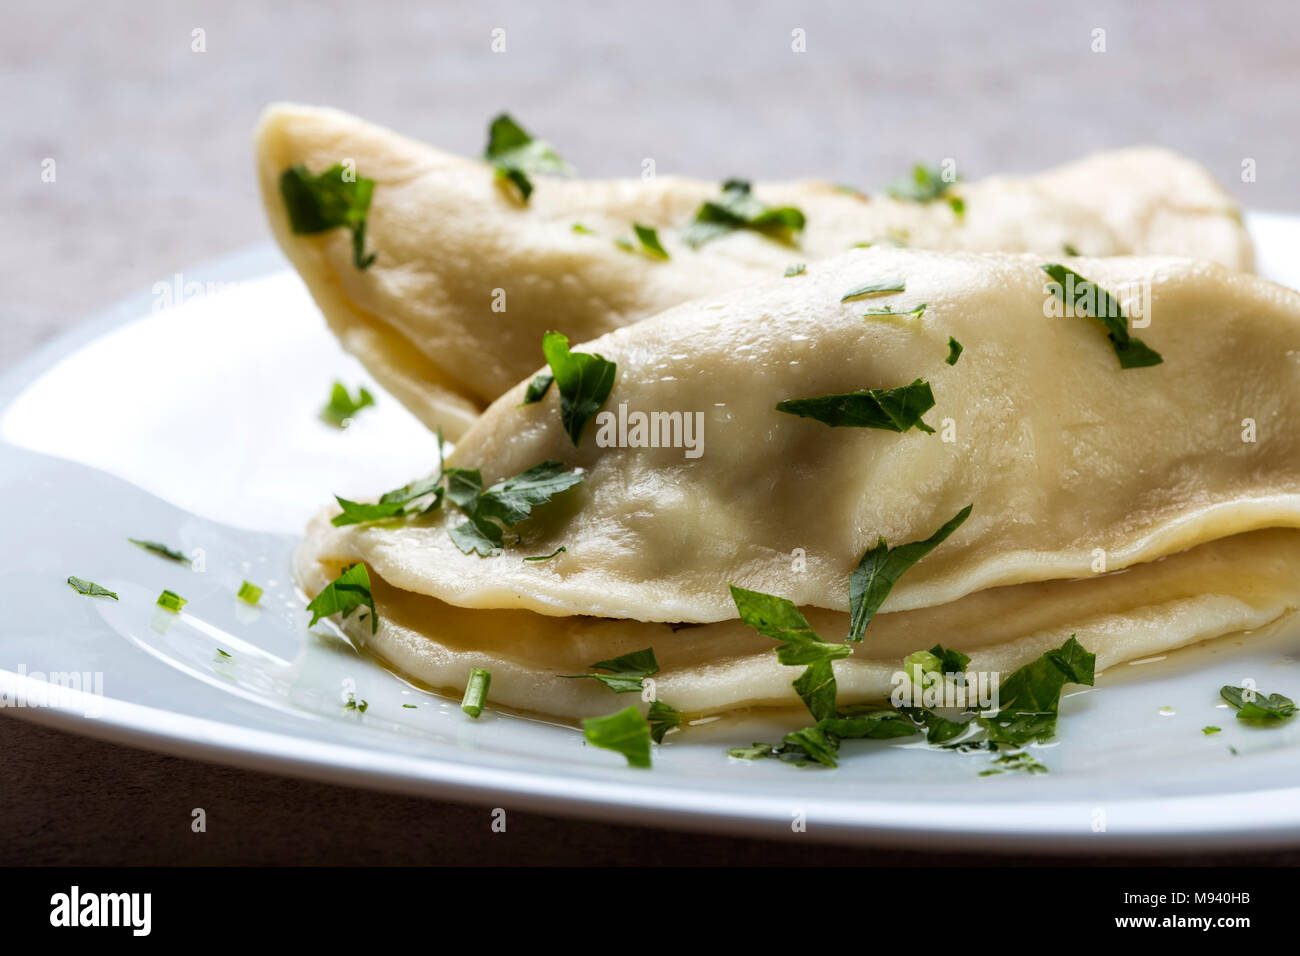 Pierogi, pyrohy or dumplings, filled with beef meat and covered with parsley that can be served with sour cream Stock Photo